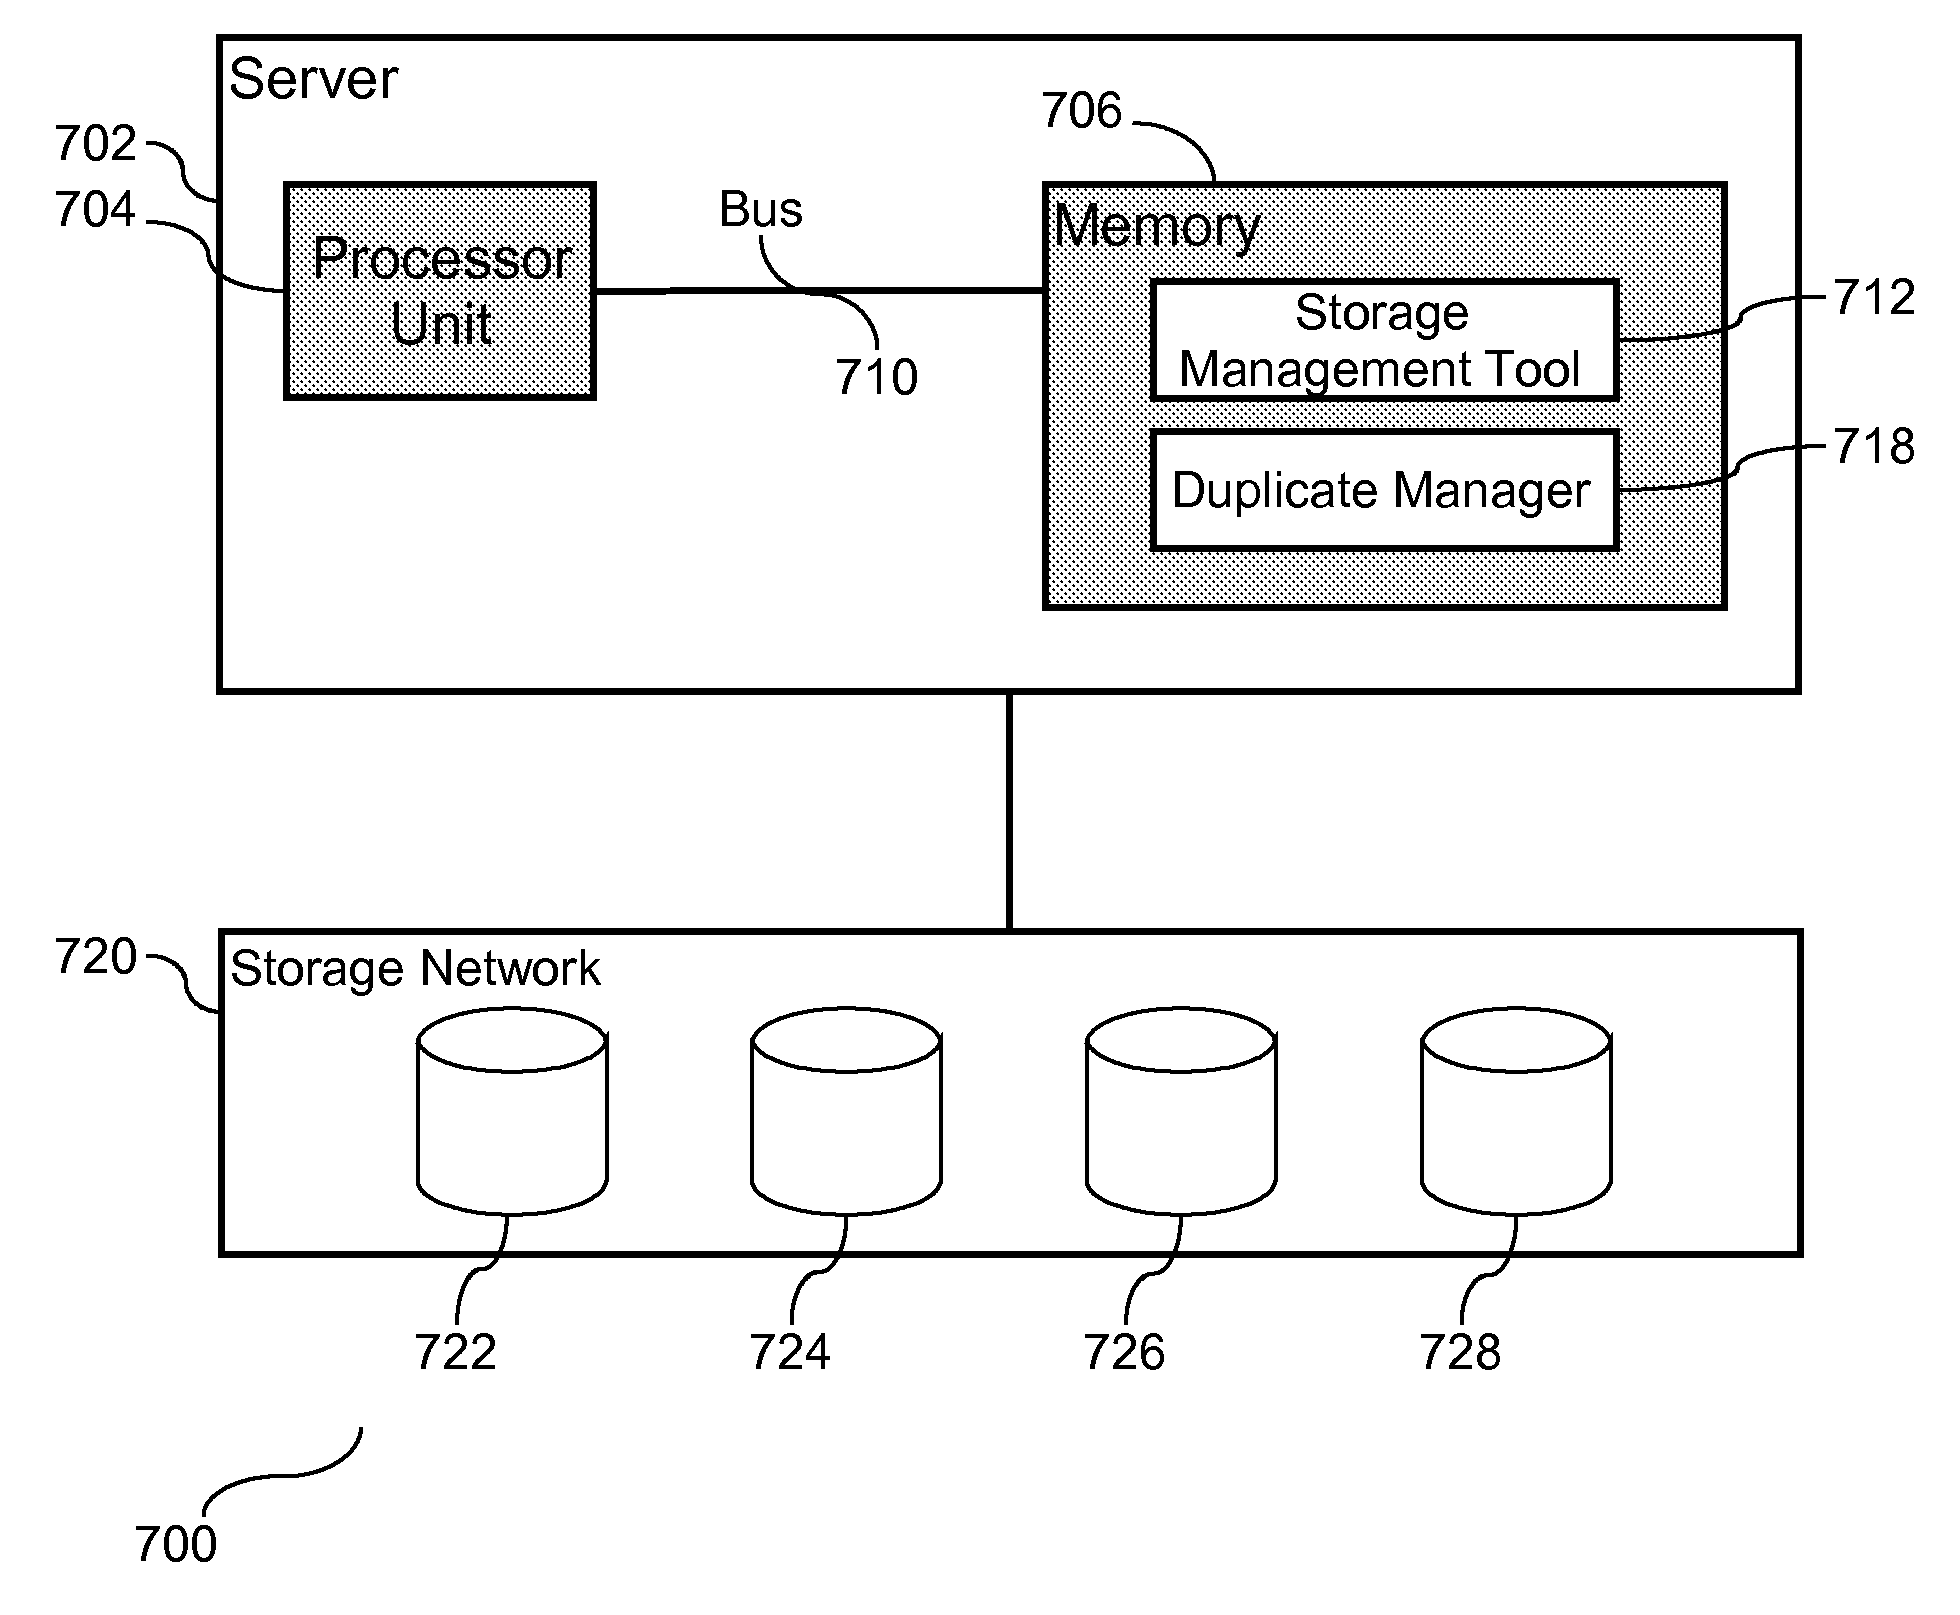 Method of Enhancing De-Duplication Impact by Preferential Selection of Master Copy to be Retained